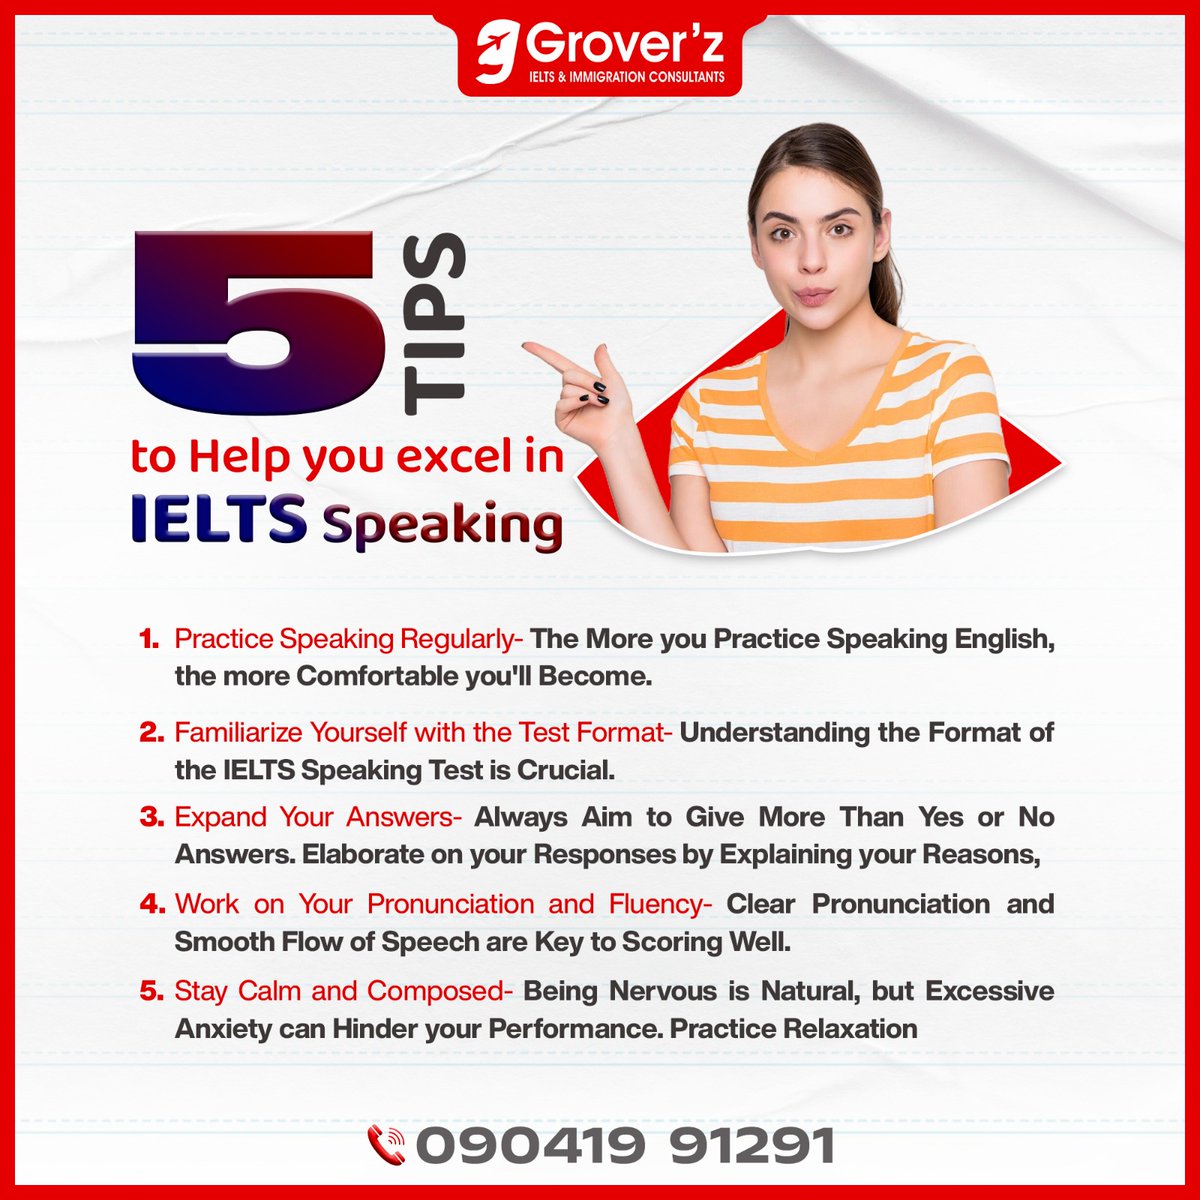 🗣️ Ready to conquer the IELTS Speaking test? Master your fluency and pronunciation with our top tips! Dive deeper into our strategies and prepare to impress. Enroll now⤵️ 09041991291 #GroverzIeltsImmigration #Faridkot #IELTSClasses #IELTSCoaching #IELTS #IELTSTips #Immigration